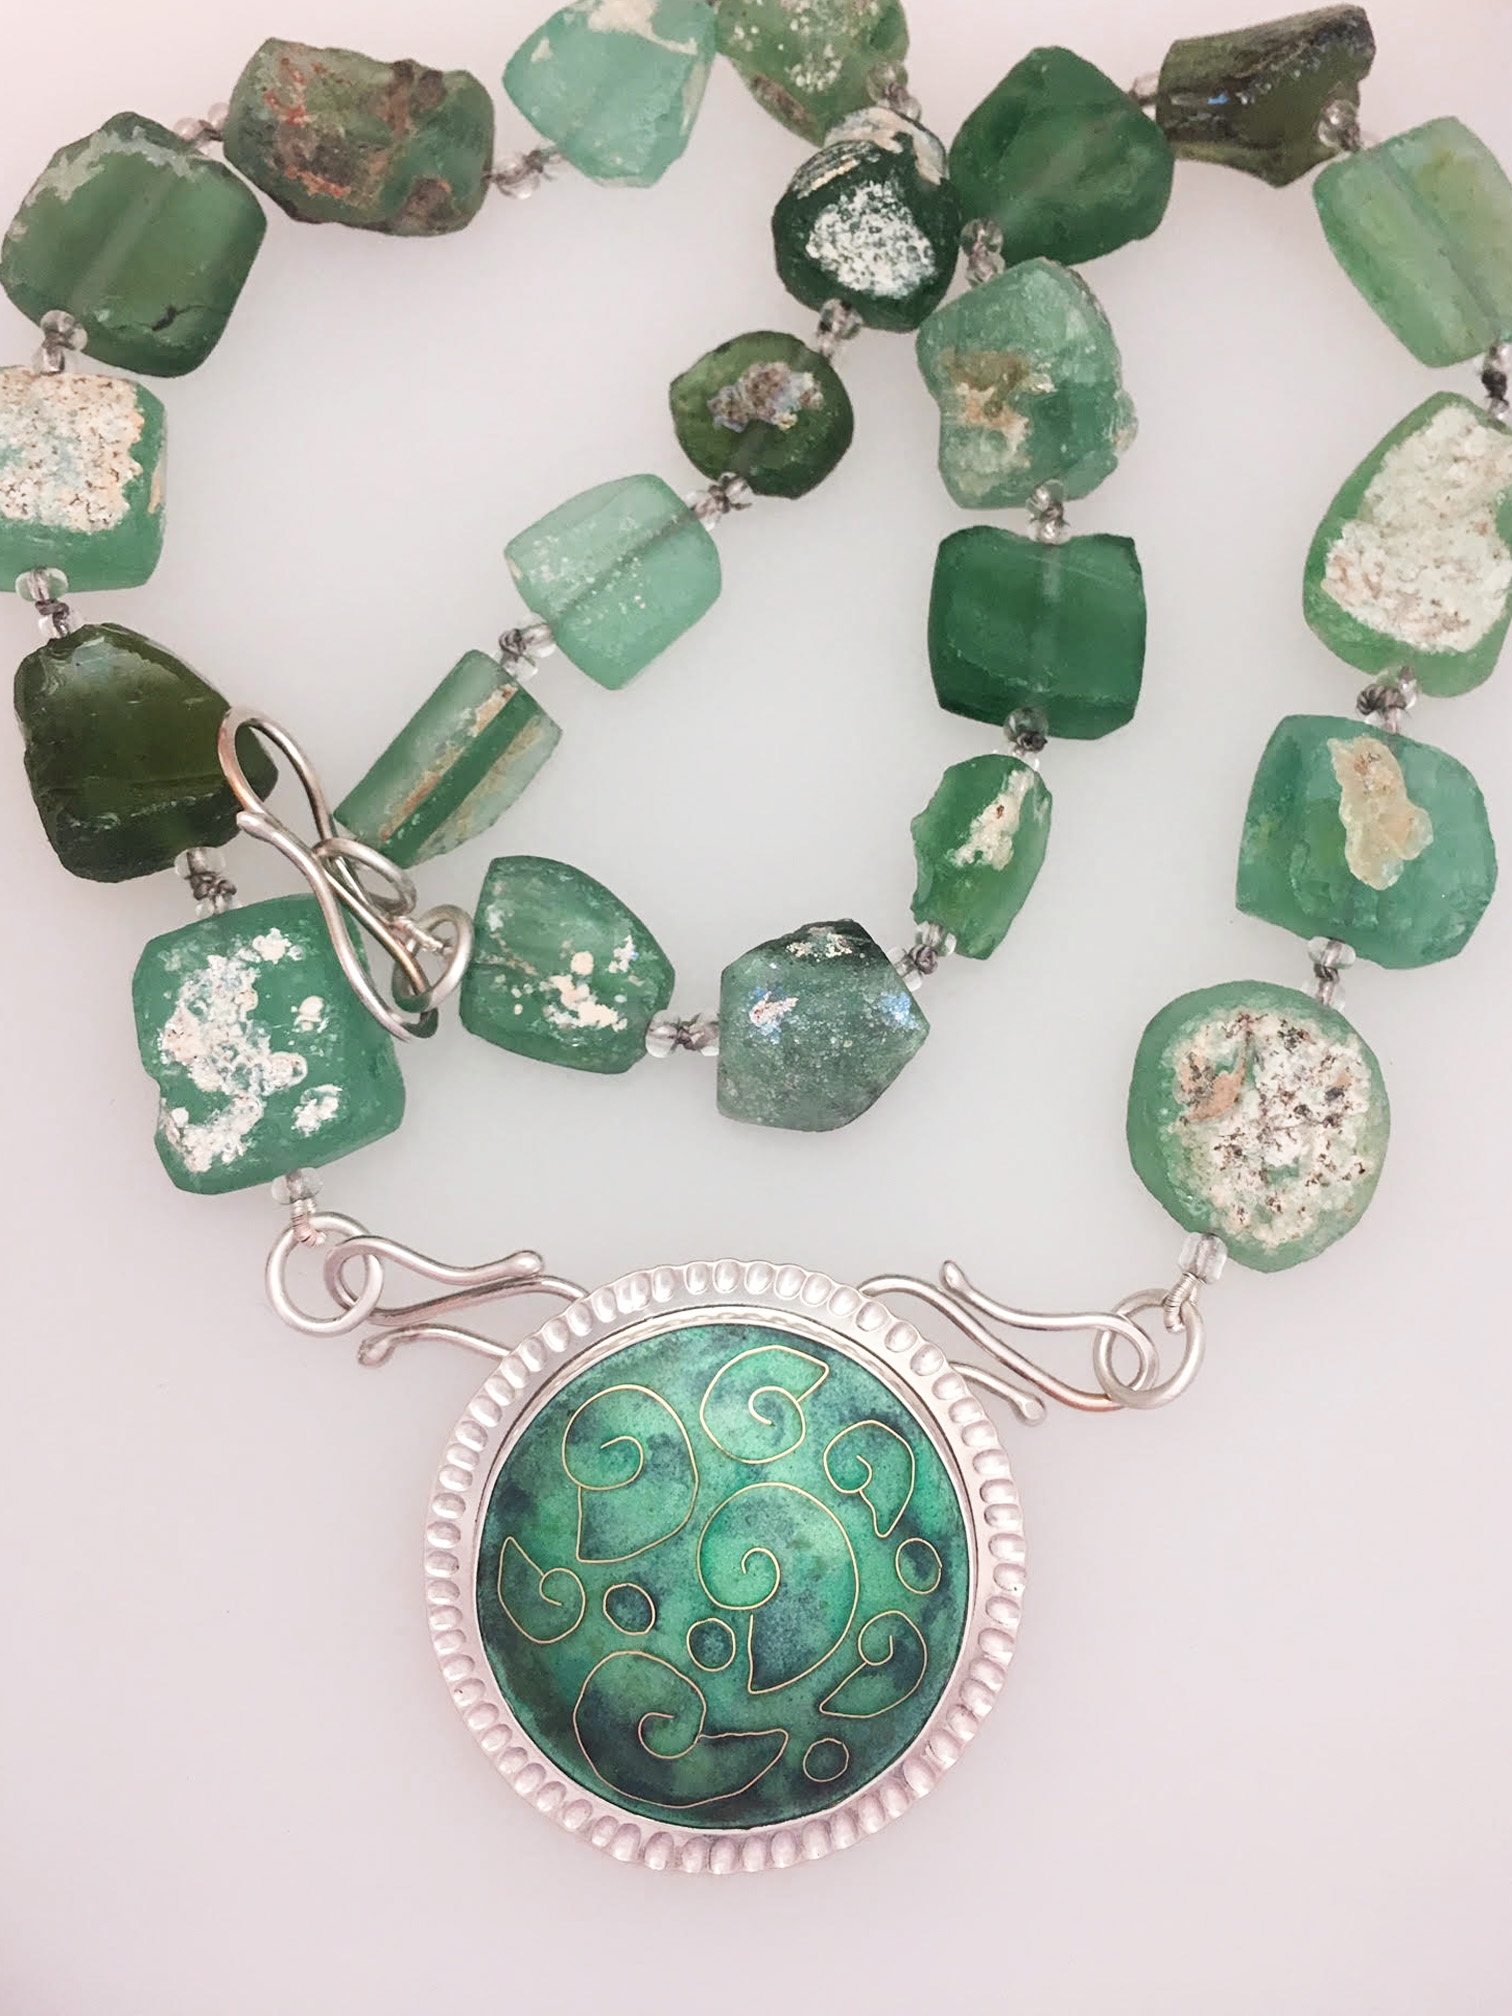 Fossil jewellery | Linda Connelly Enamels and Jewellery